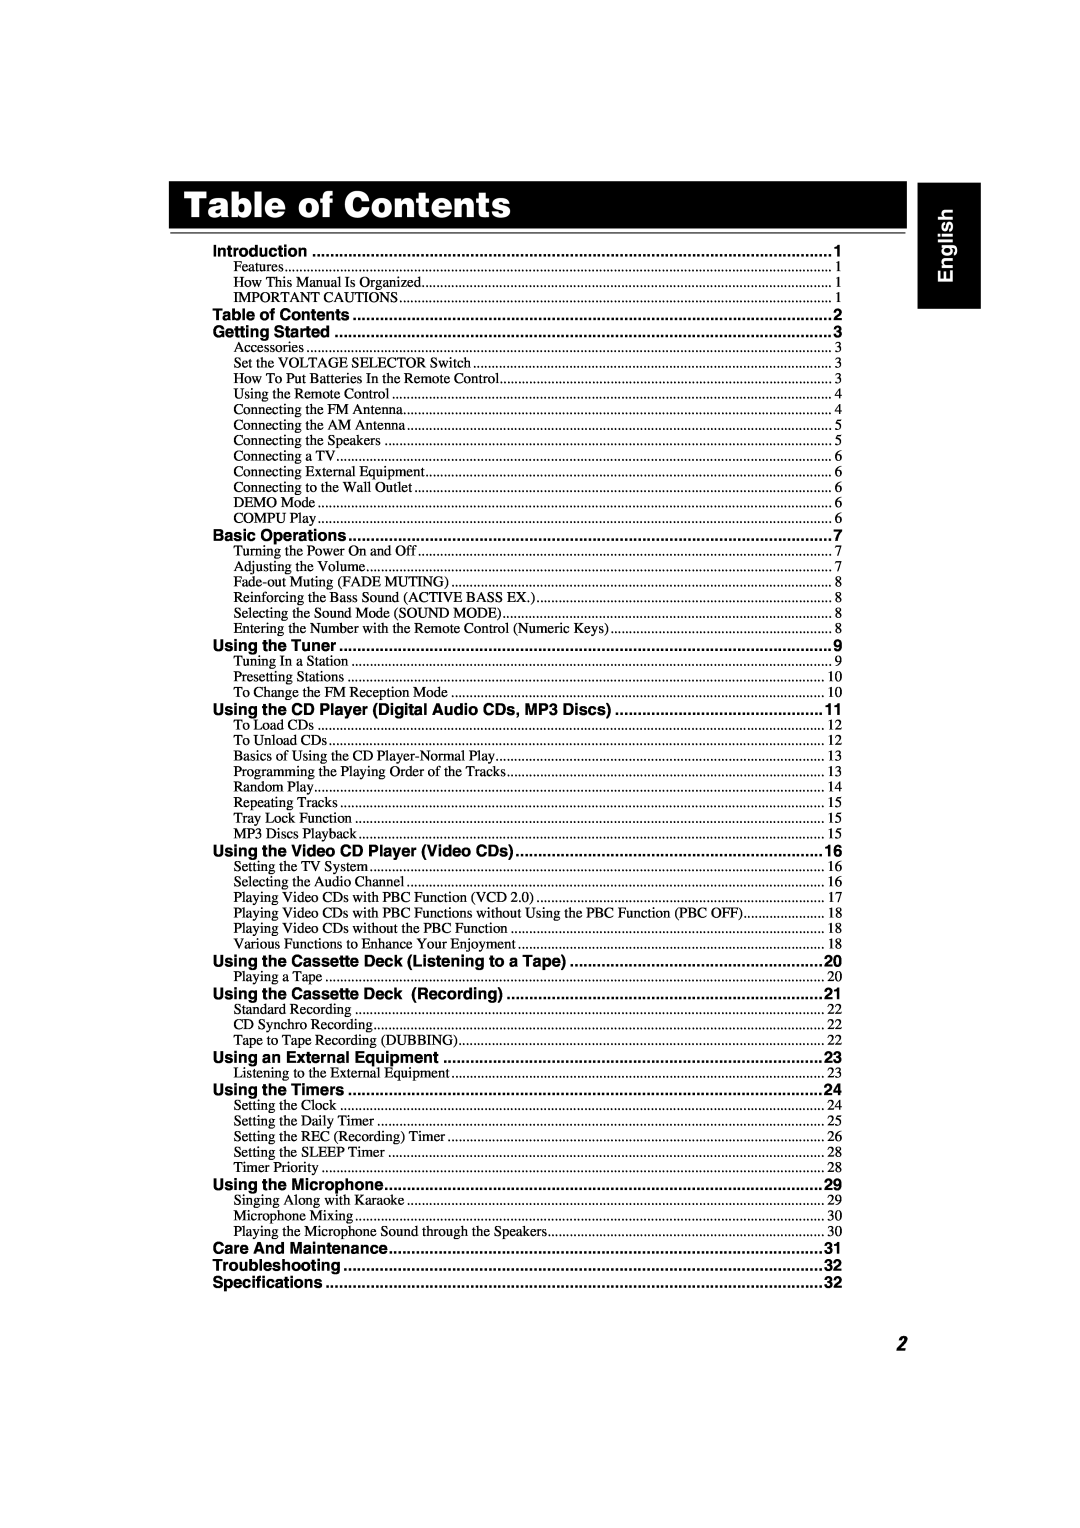 JVC LVT1091-001A, MX-GA3V, SP-MXGA3V, CA-MXGA3V manual Table of Contents, English 